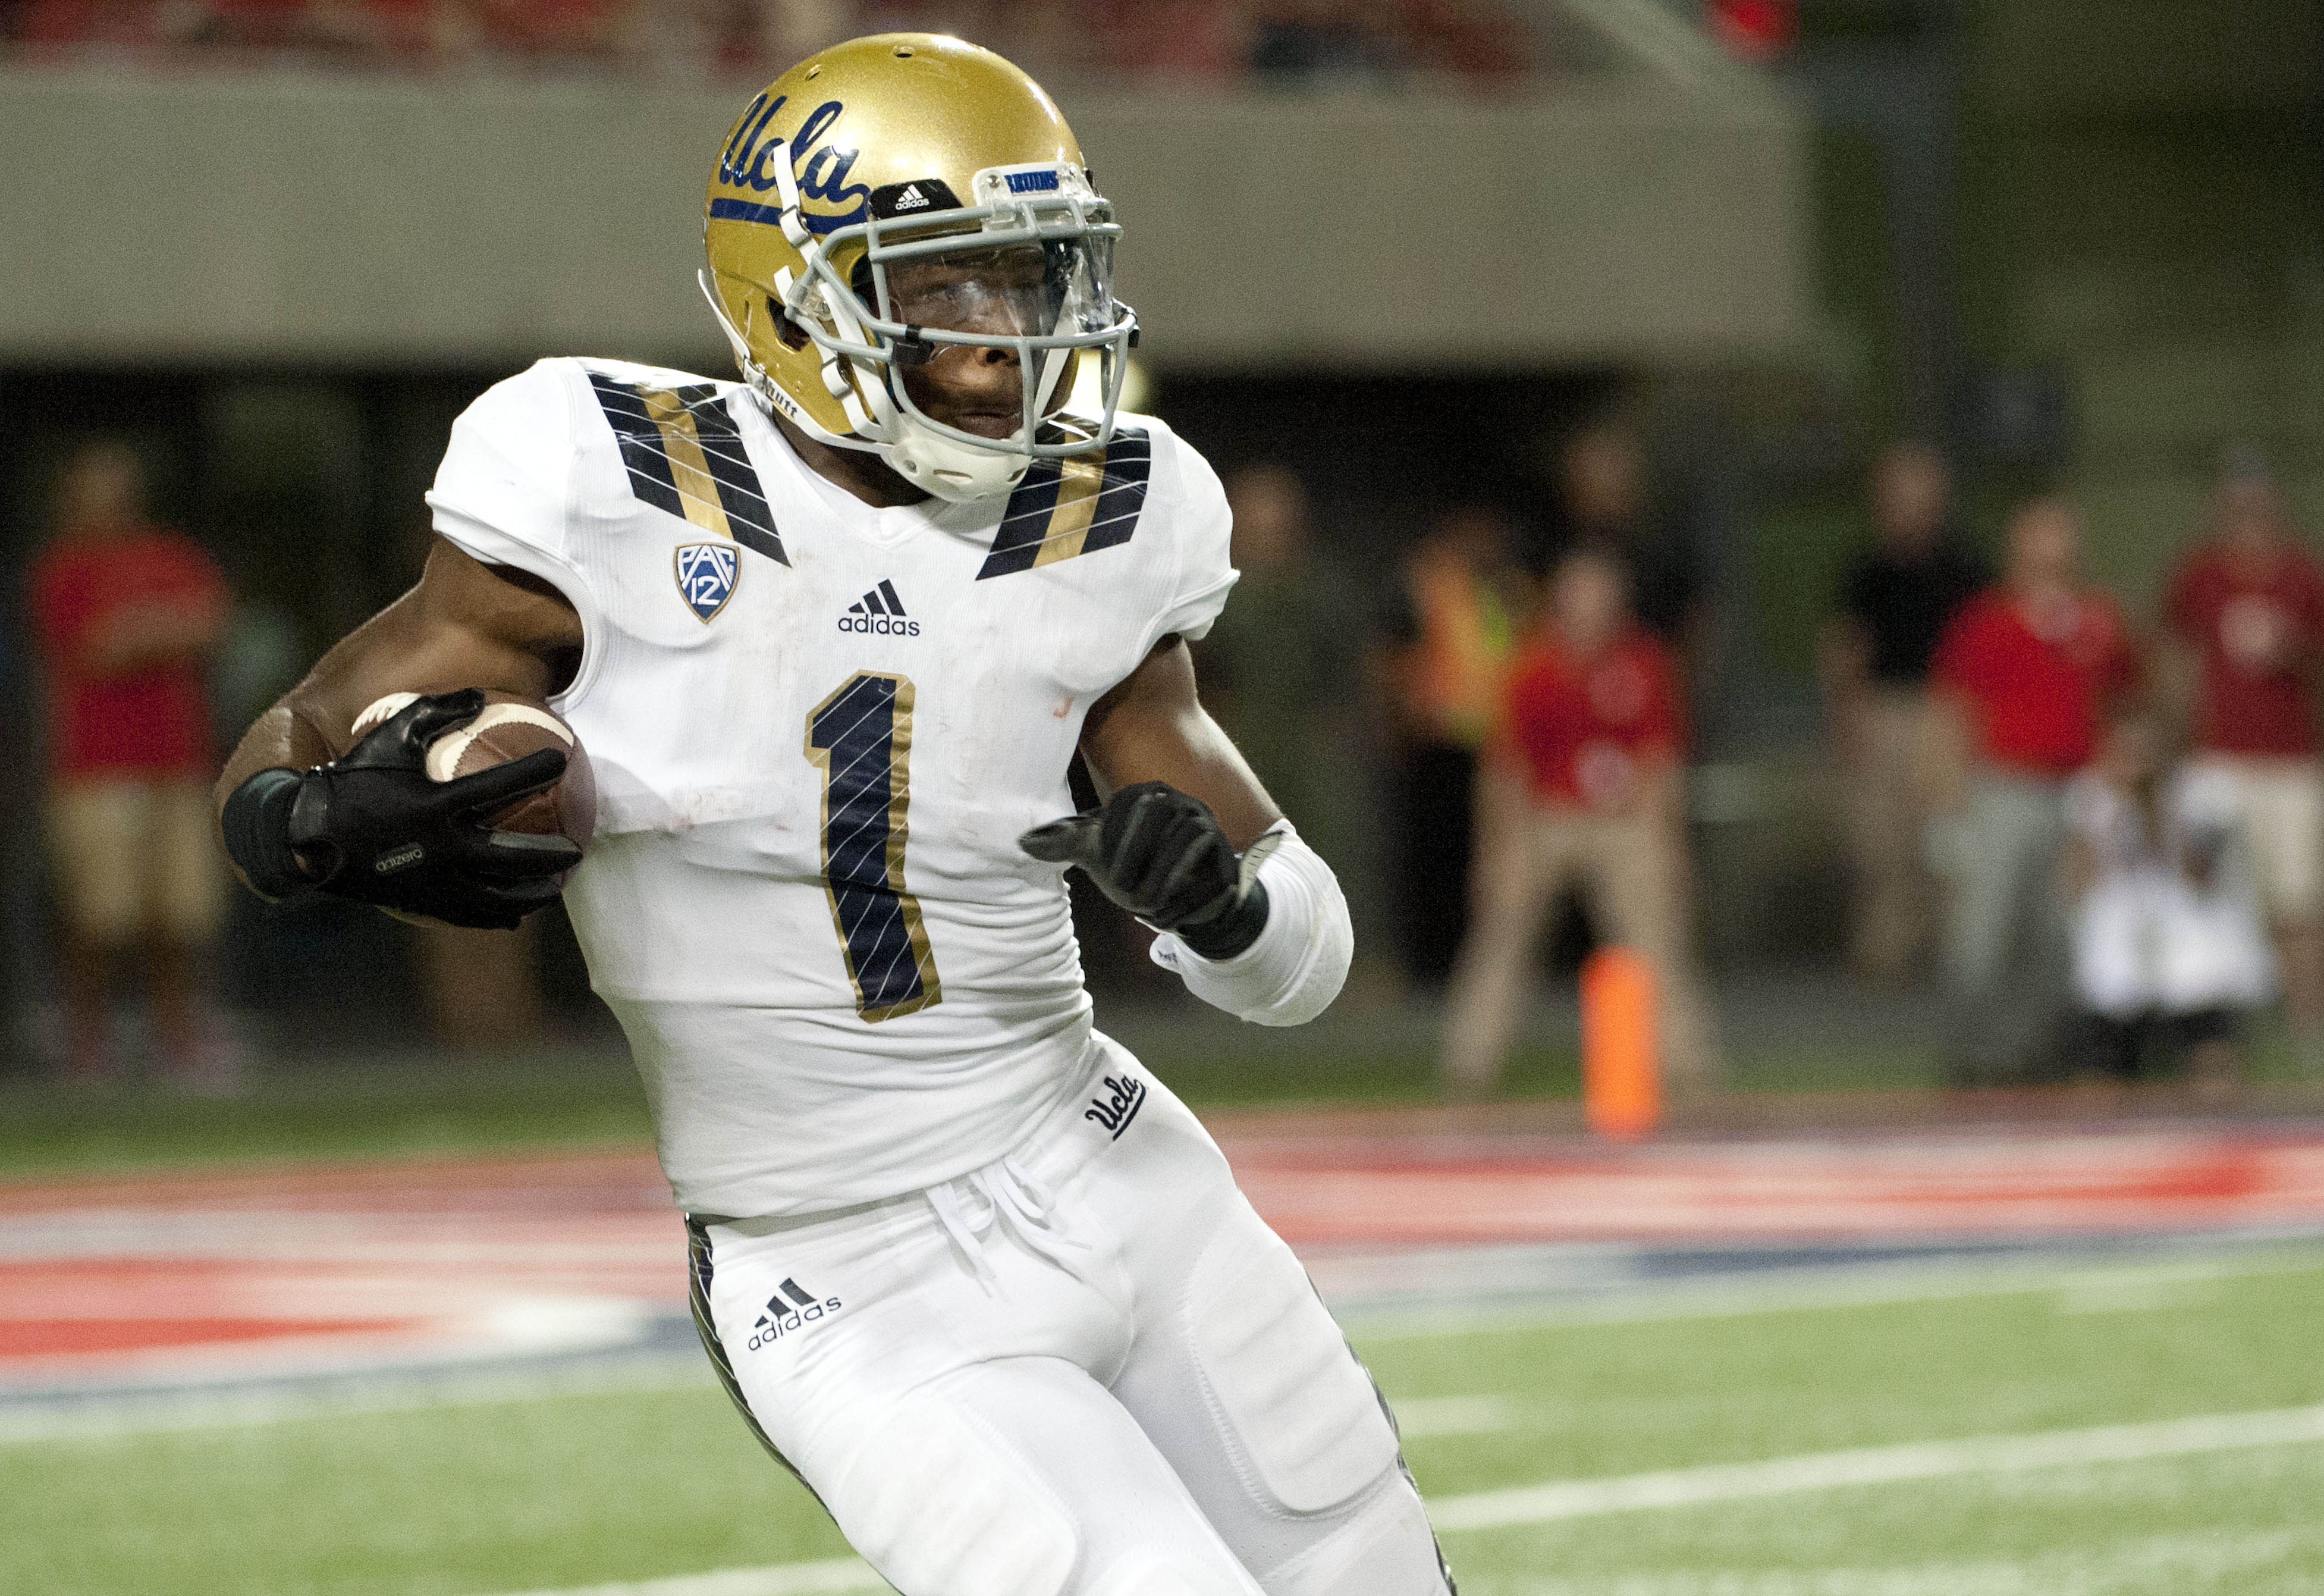 UCLA CB Ishmael Adams INT against Arizona in his first game back from suspension. 